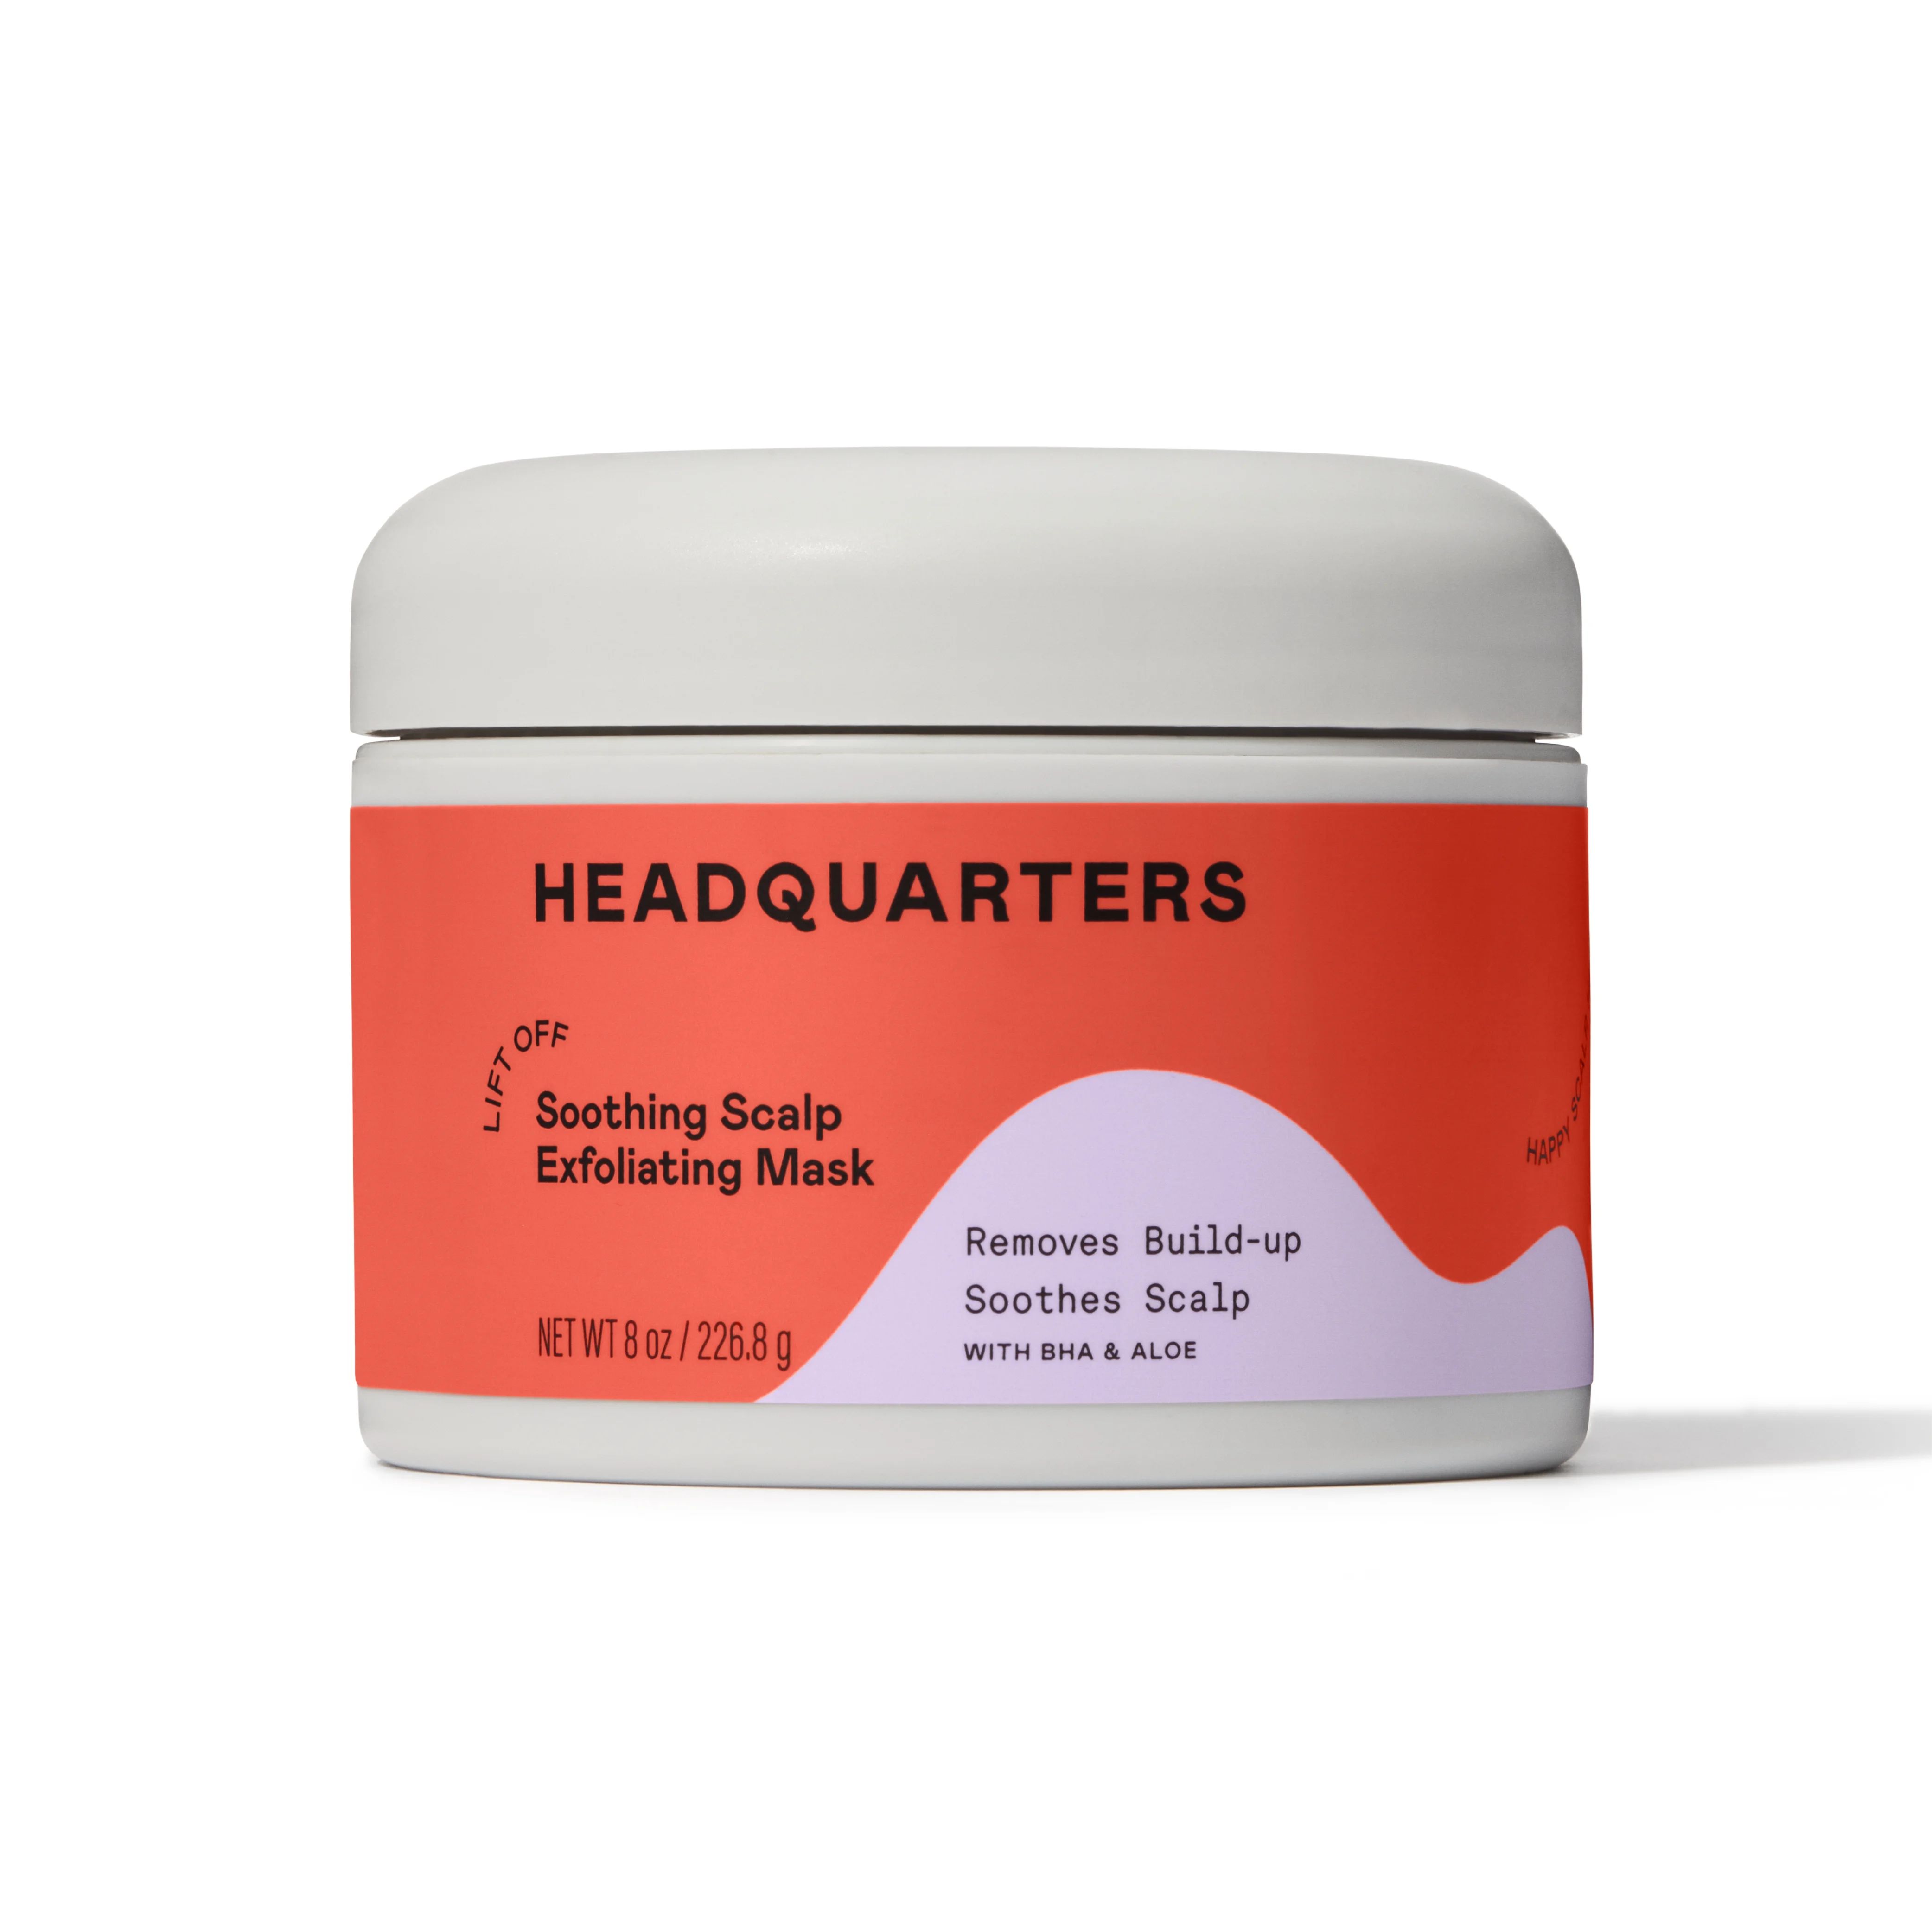 Headquarters Soothing Scalp Exfoliating Mask for Dry Scalp and Hair, Net wt 8 oz / 226.8 g - Walm... | Walmart (US)